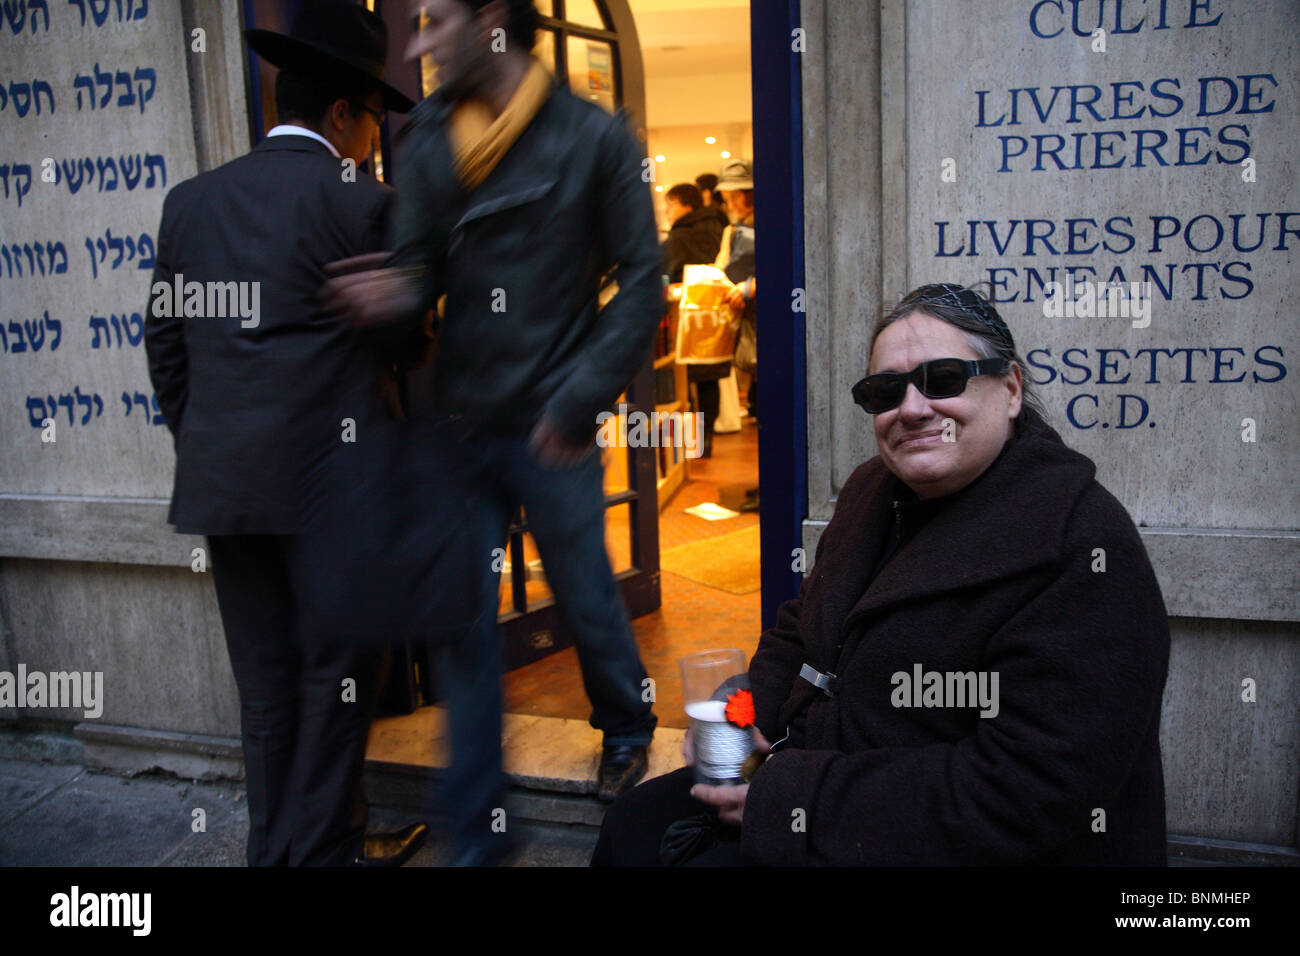 Woman collecting money for Hanukkah in front of a Jewish bookstore, Paris, France Stock Photo